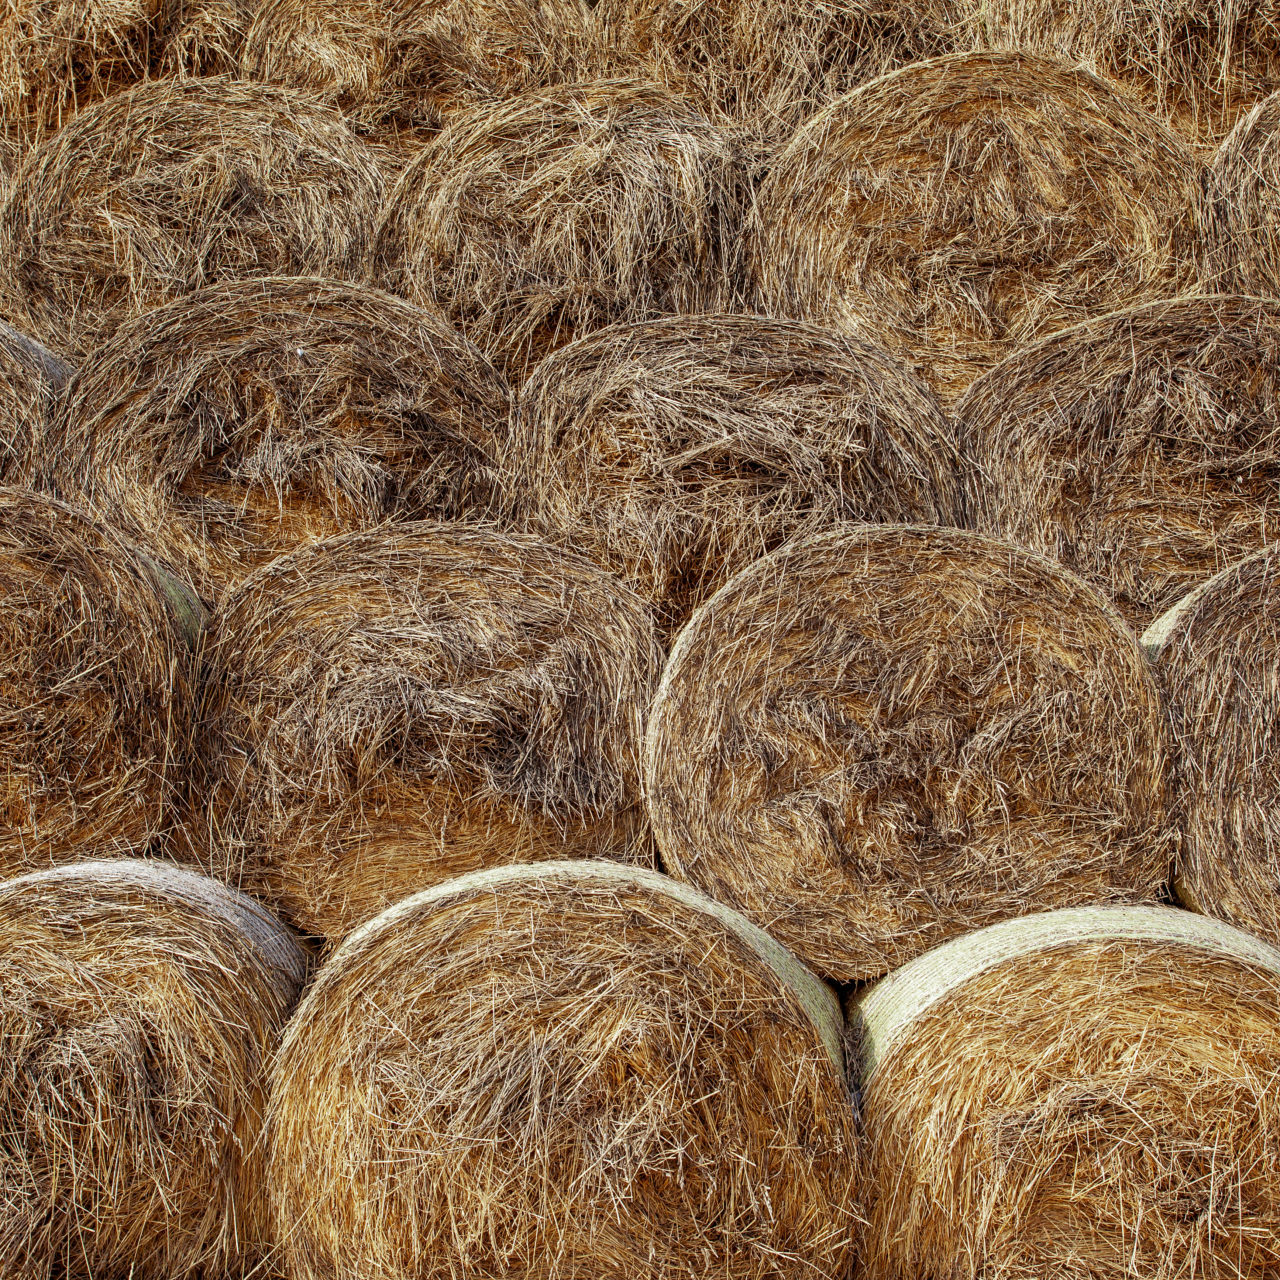 Hay stock for livestock farming for the winter